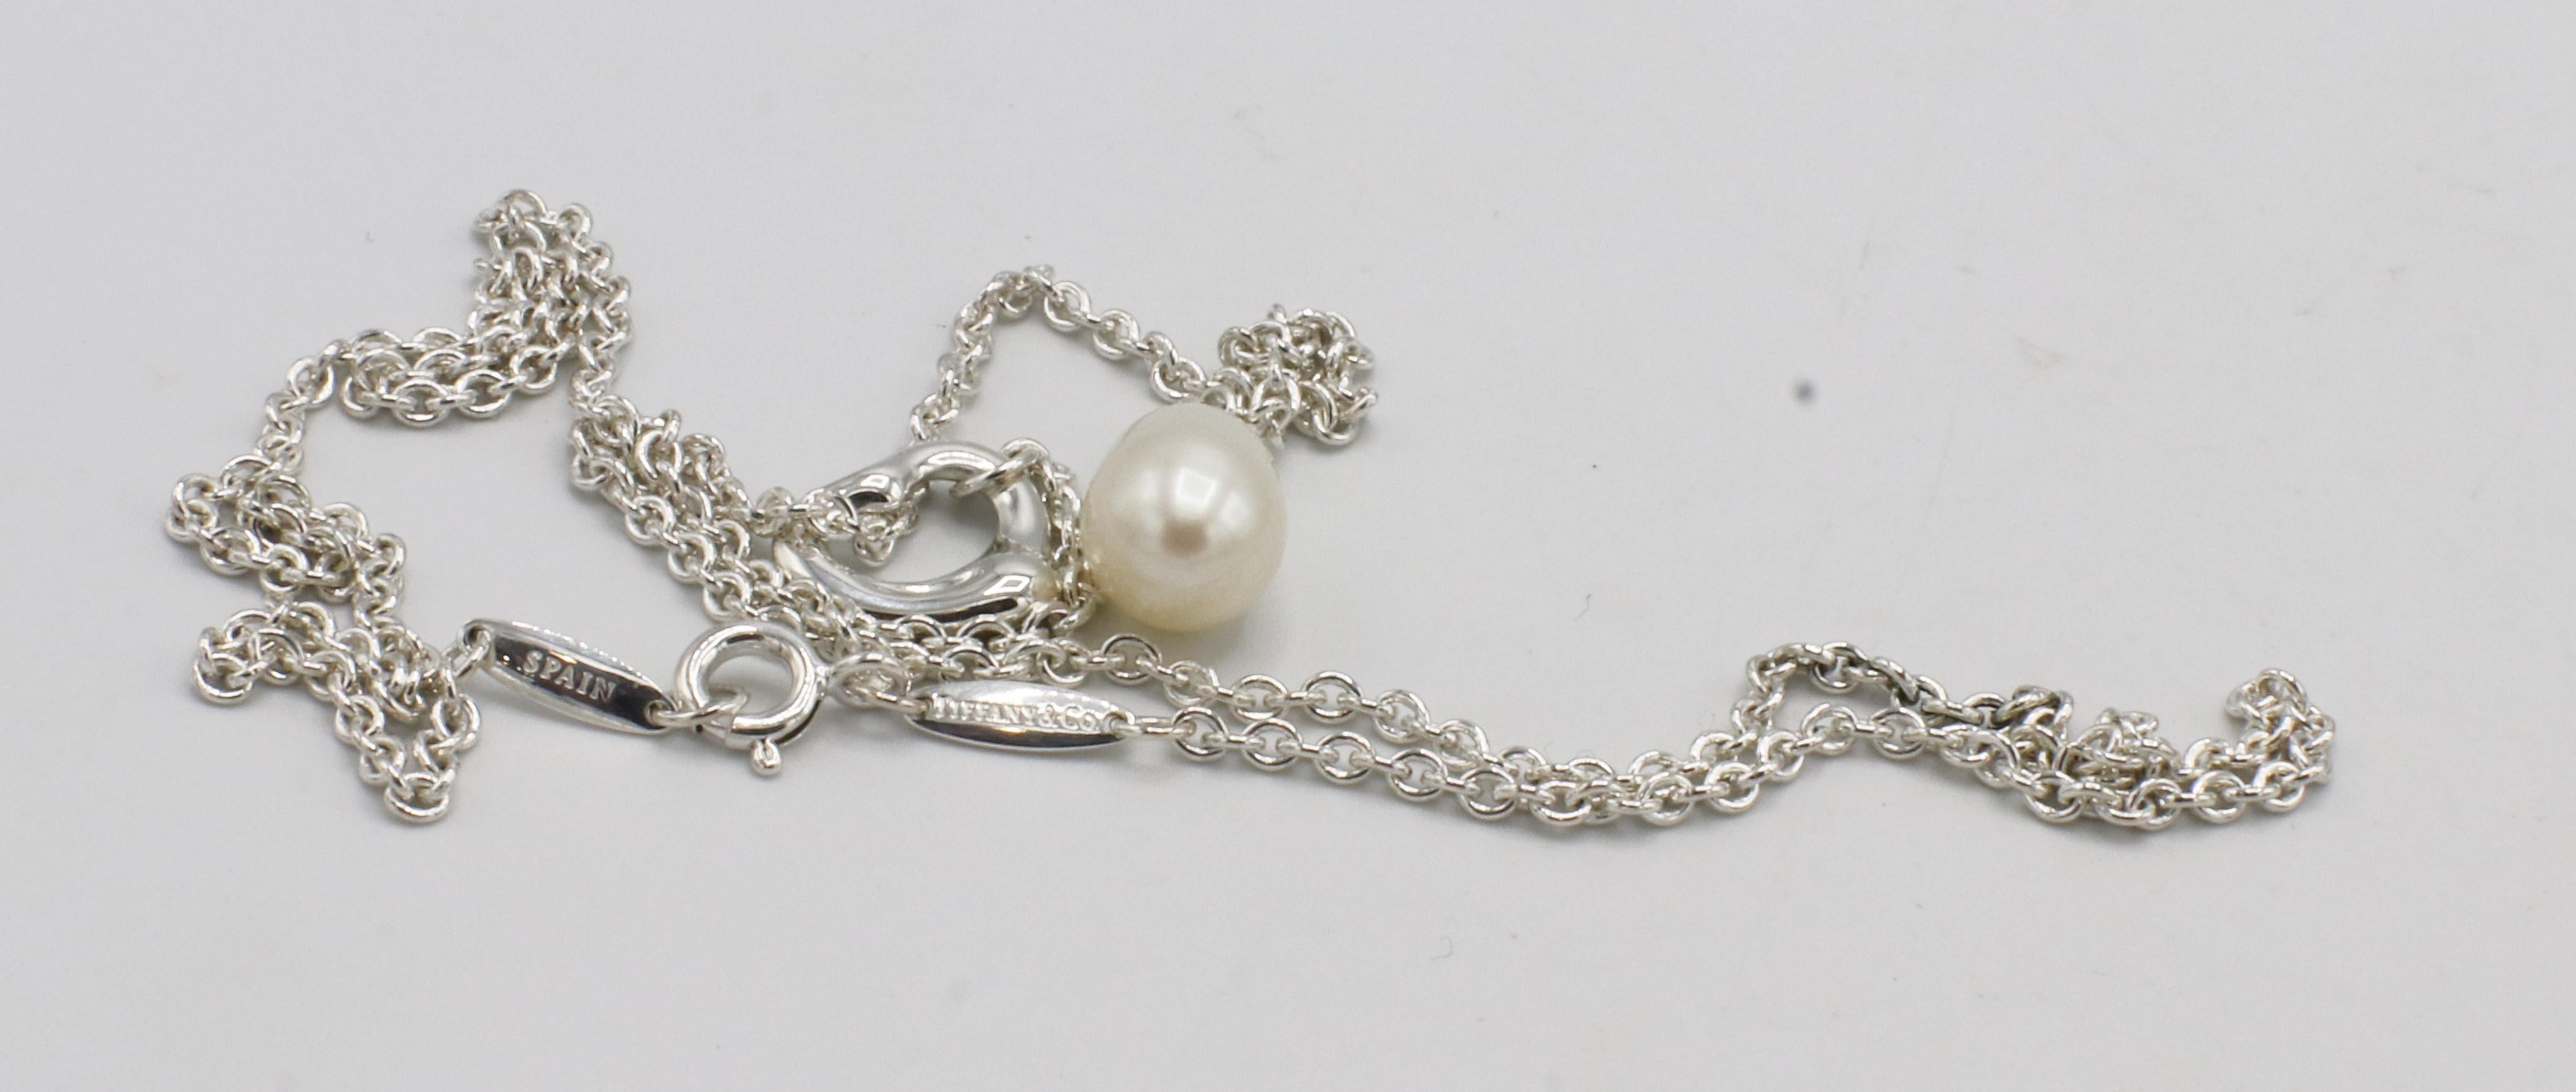 tiffany and co pearl necklace